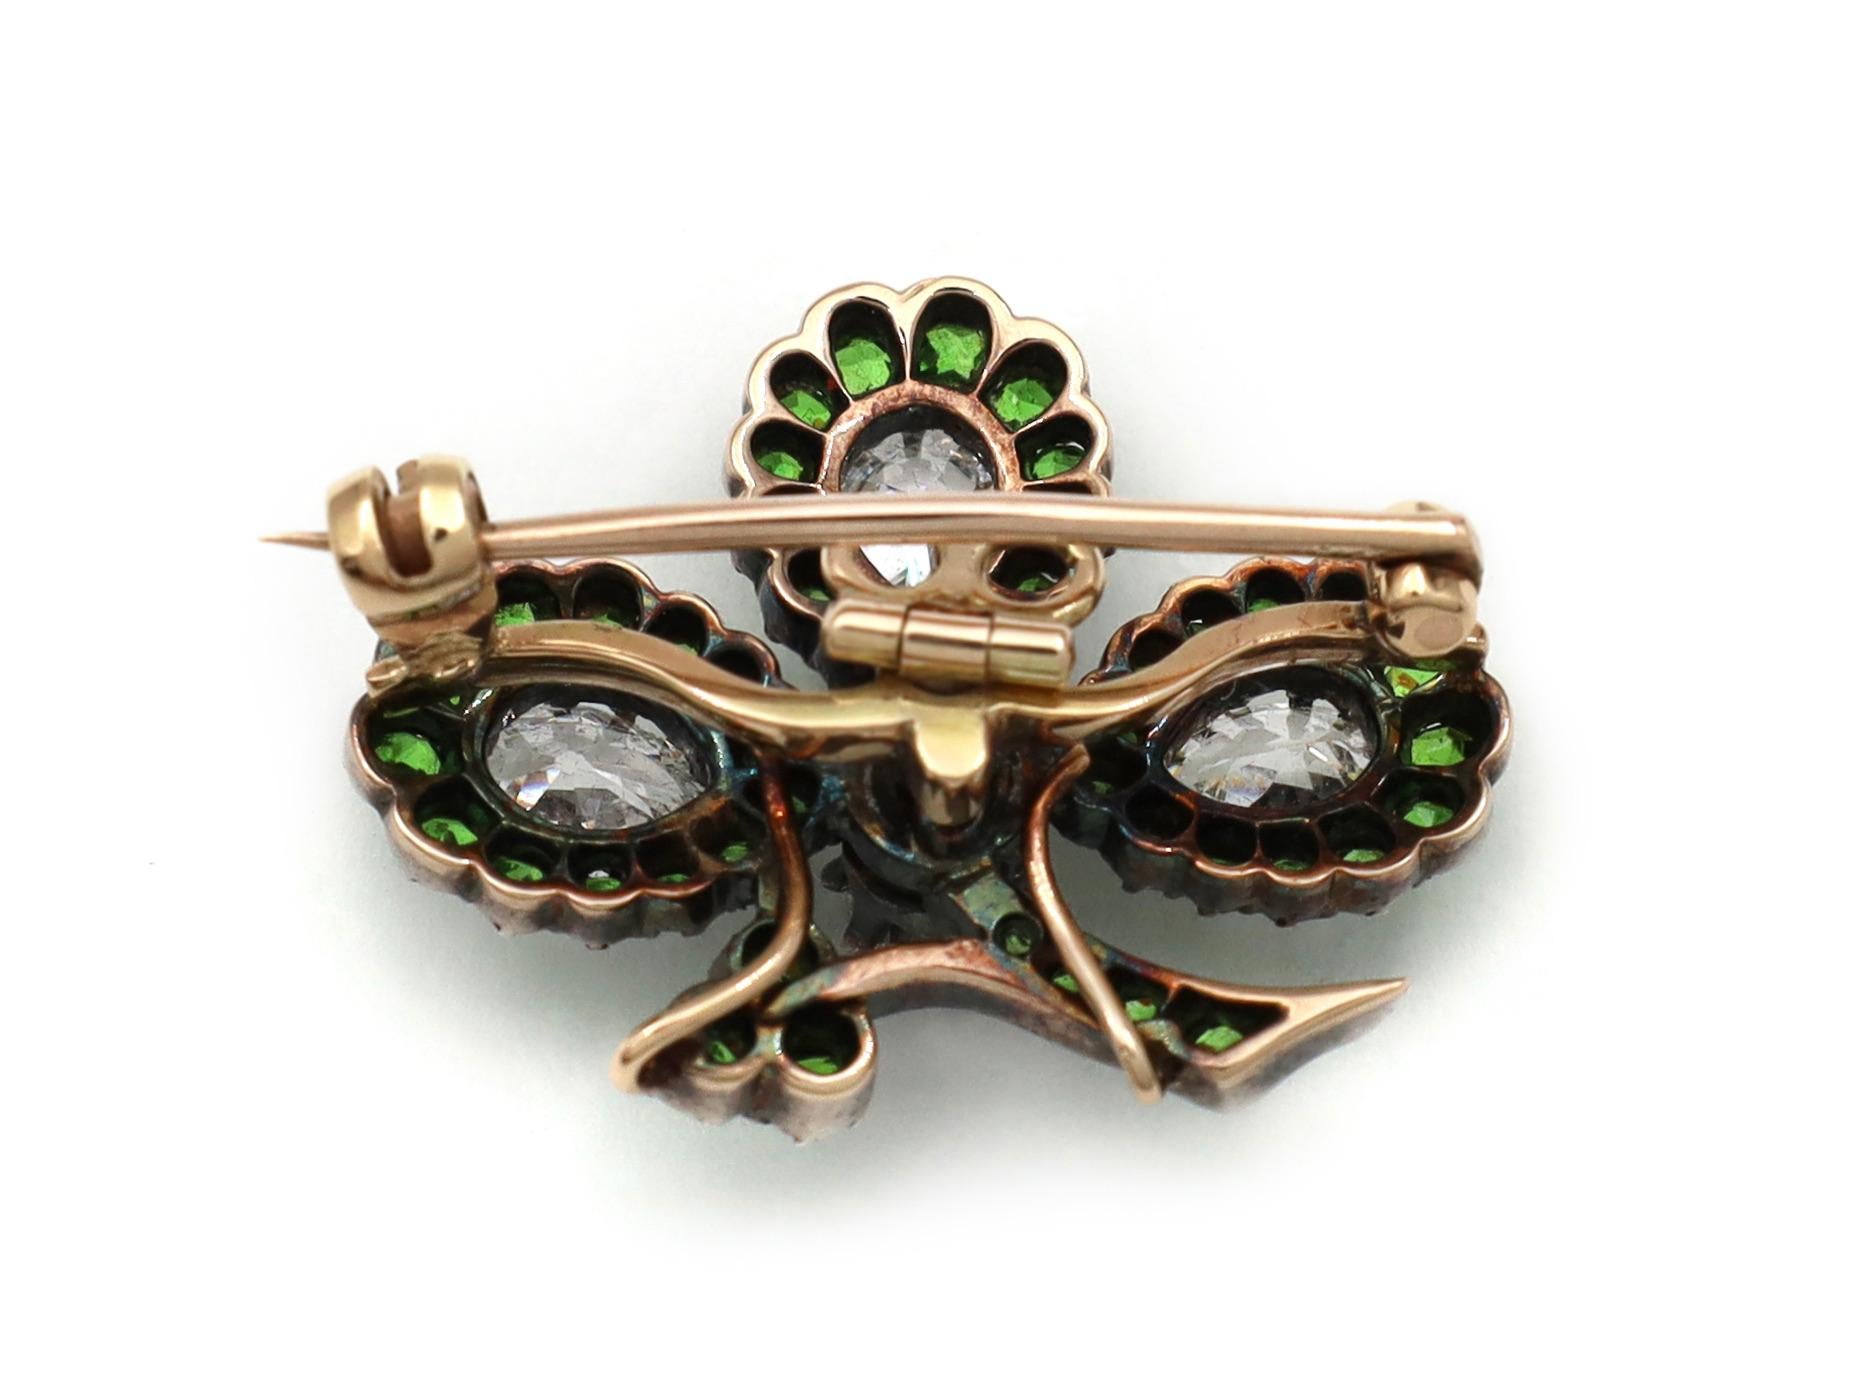 Antique shamrock brooch set with diamonds and demantoid garnets in yellow gold. Set with three estimated 0.52ct pear shape Old cut diamonds in claw settings, centred with an estimated 0.26ct round Old European cut diamond in a raised claw setting,